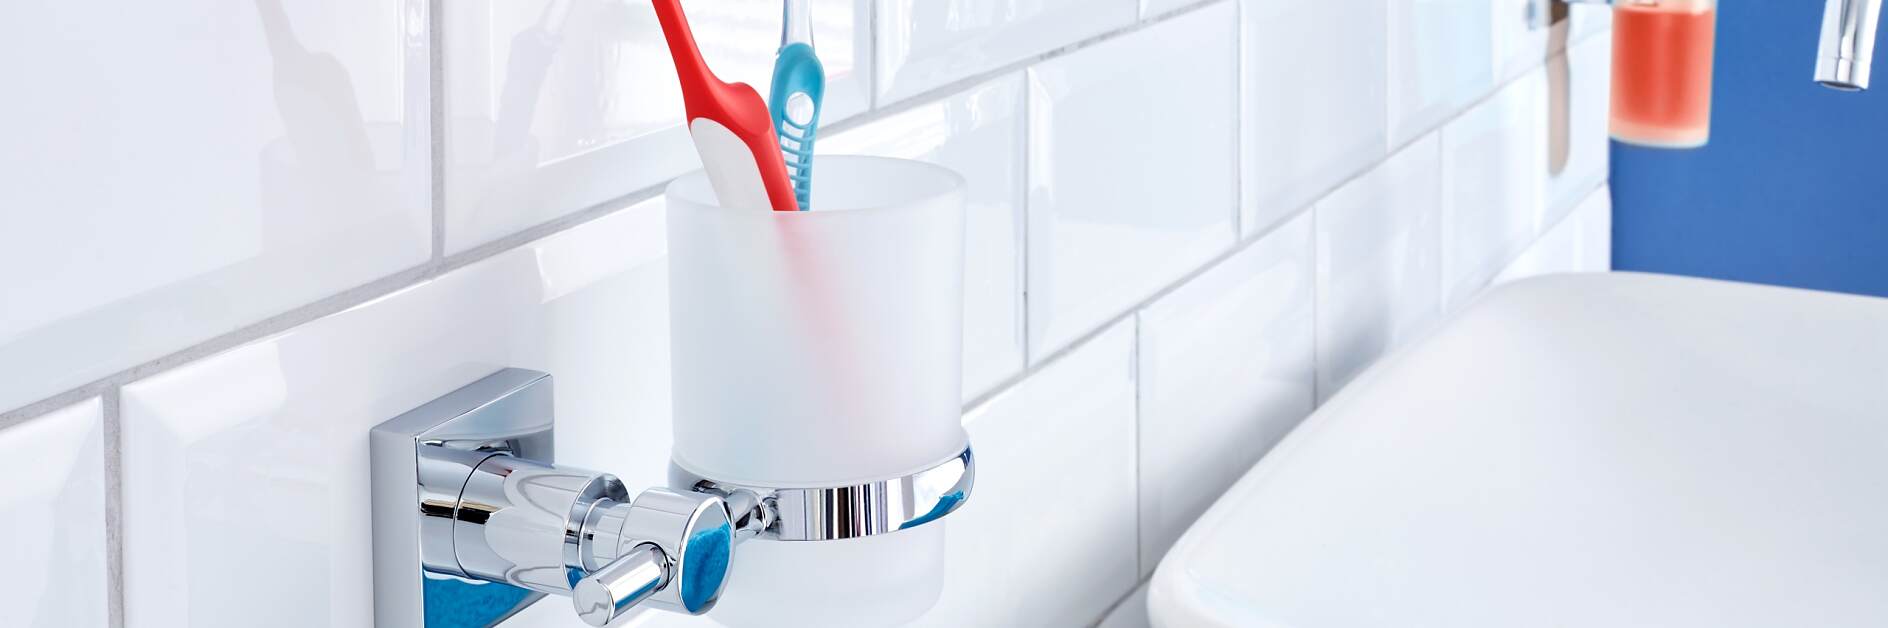 Toothbrush Cup Holder